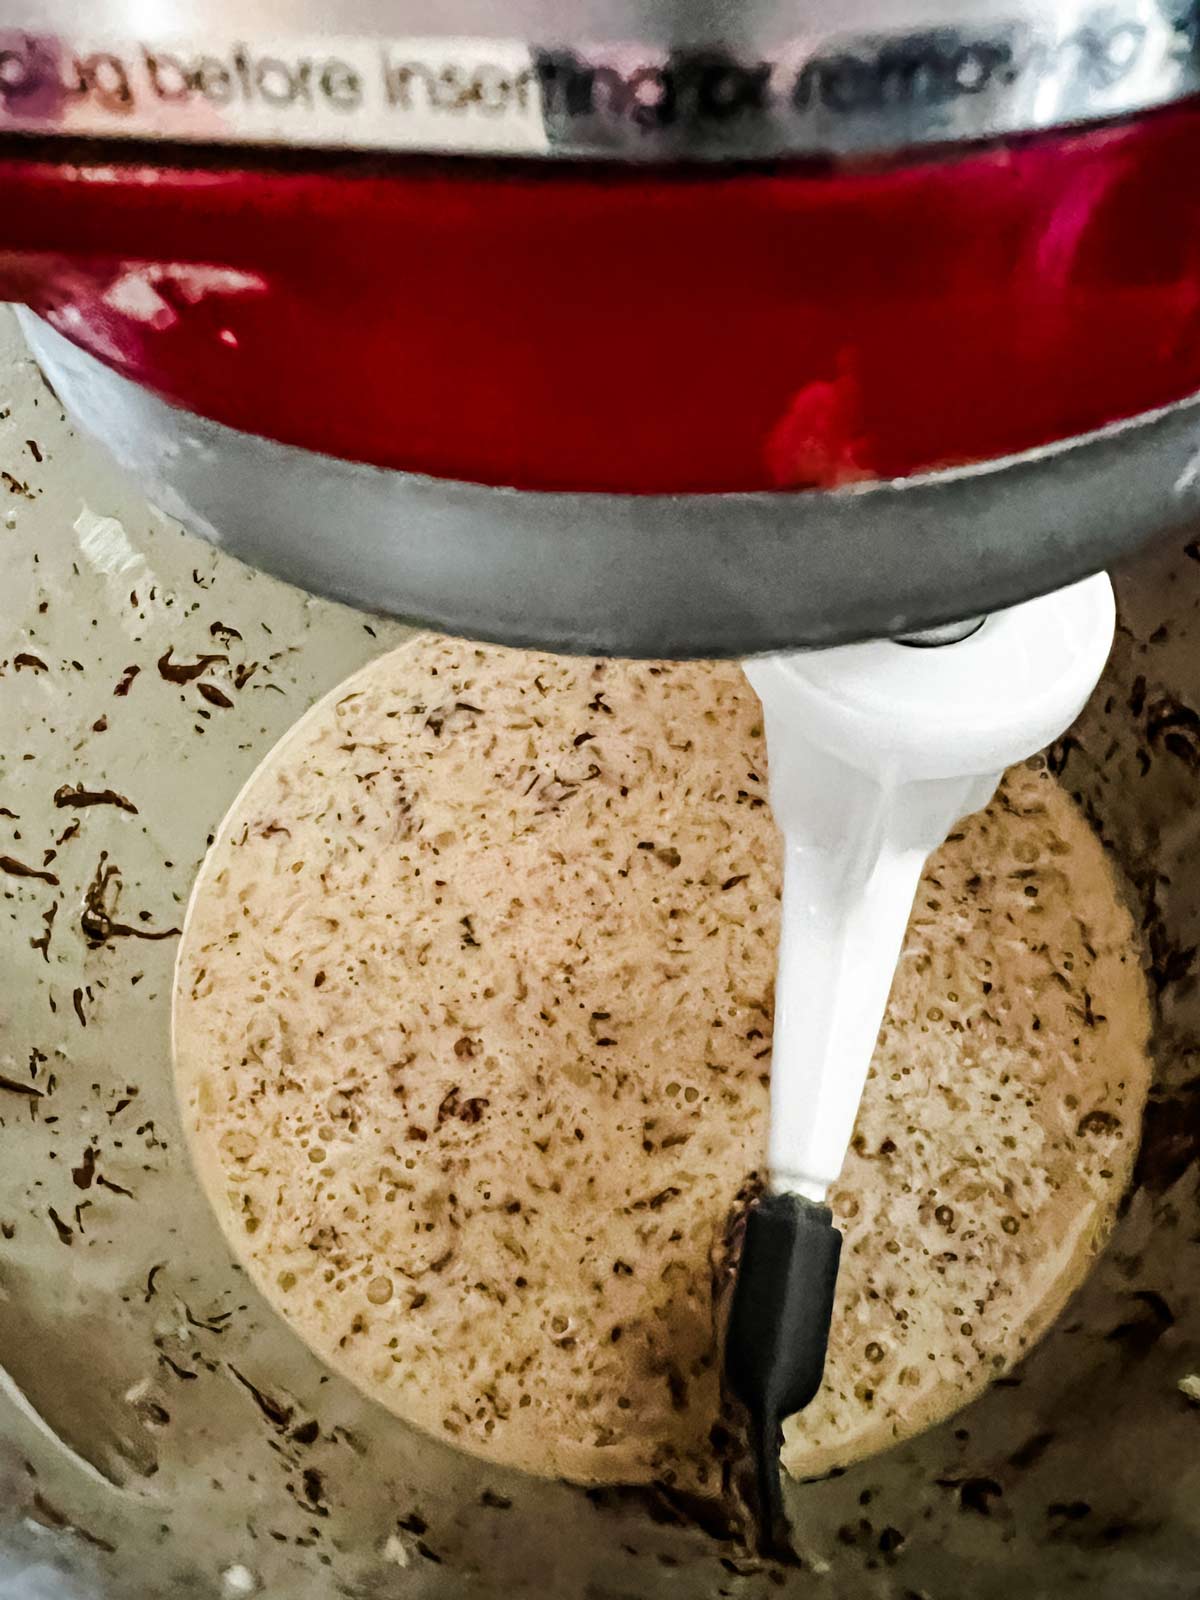 Eggs, milk, butter, Nutella, and vanilla being mixed in the bowl of a stand mixer.